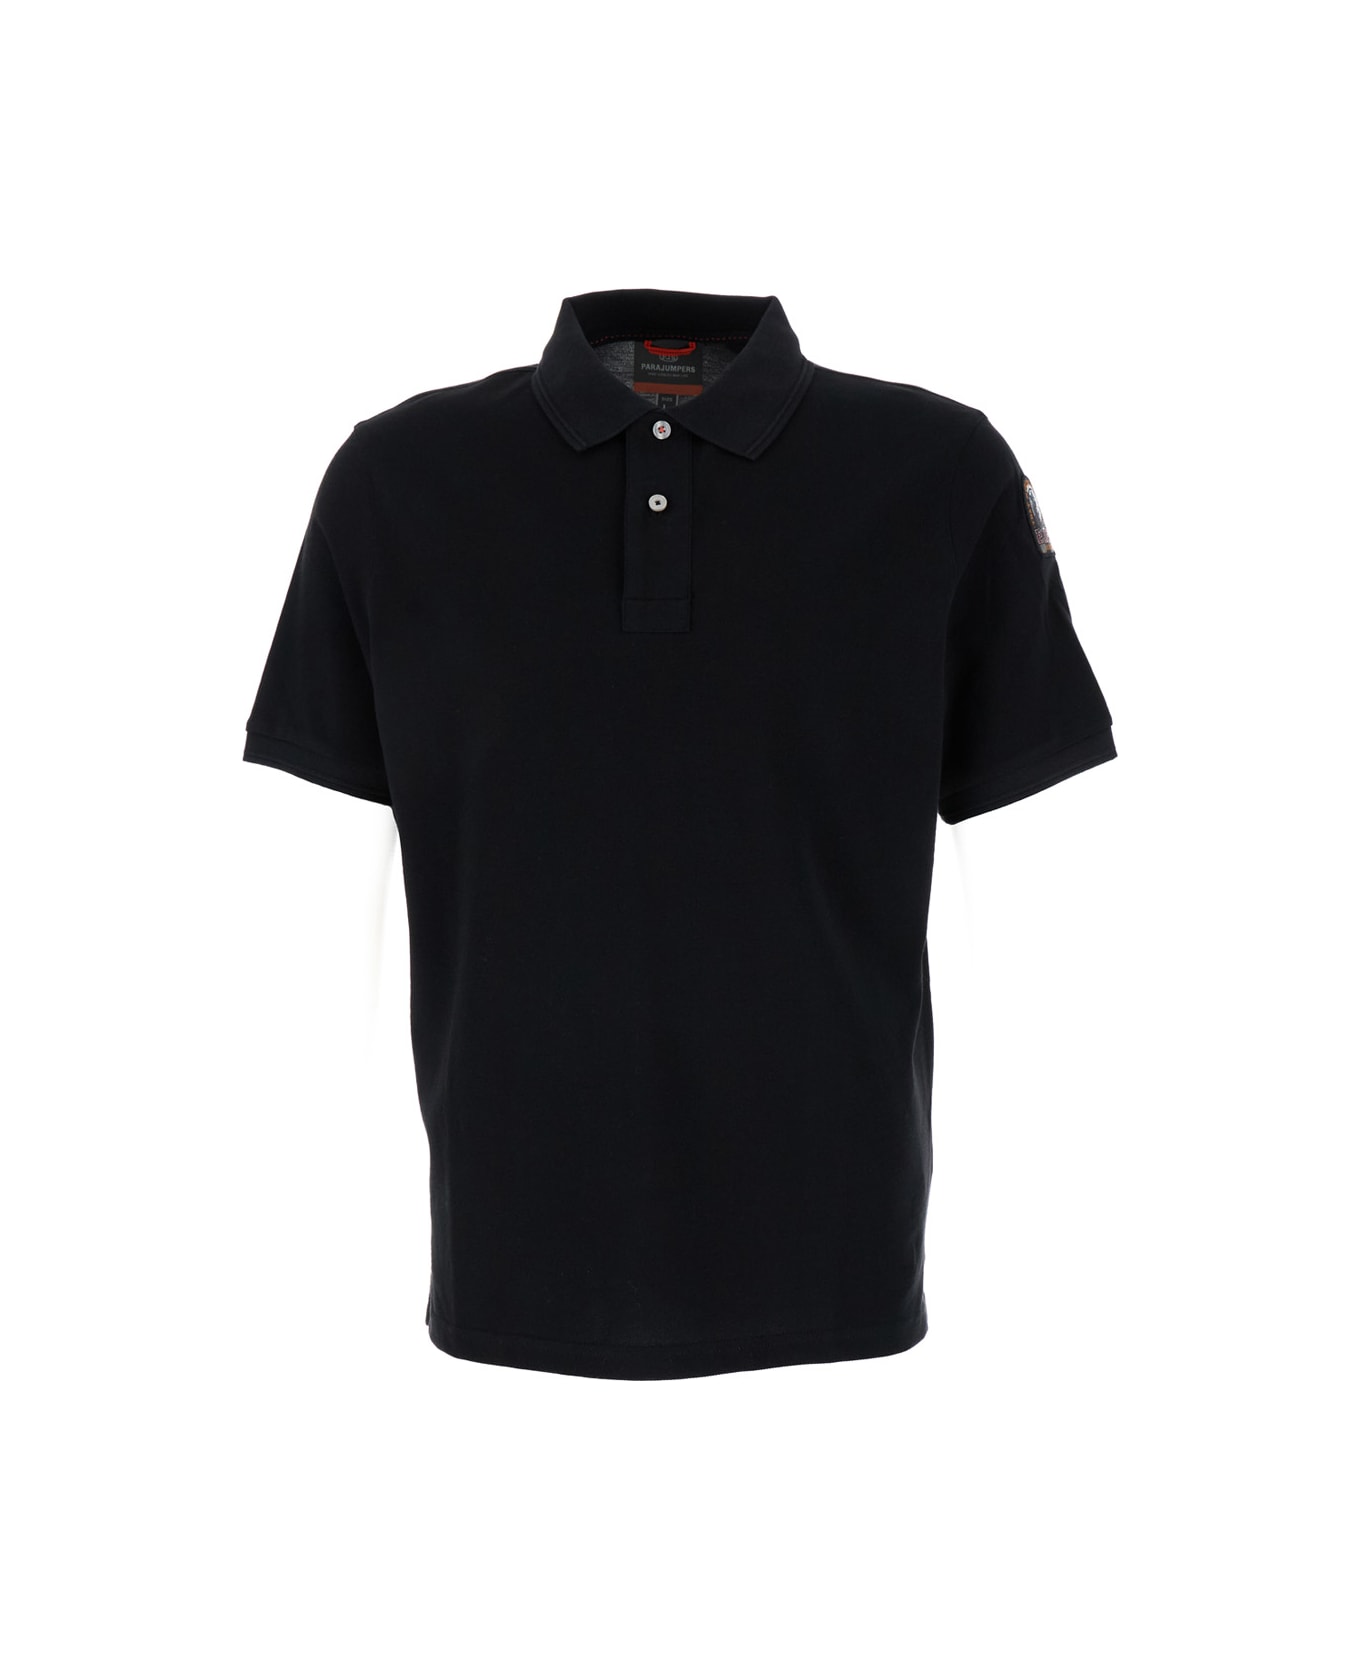 Parajumpers Black Polo Shirt In Cotton Man - Black ポロシャツ